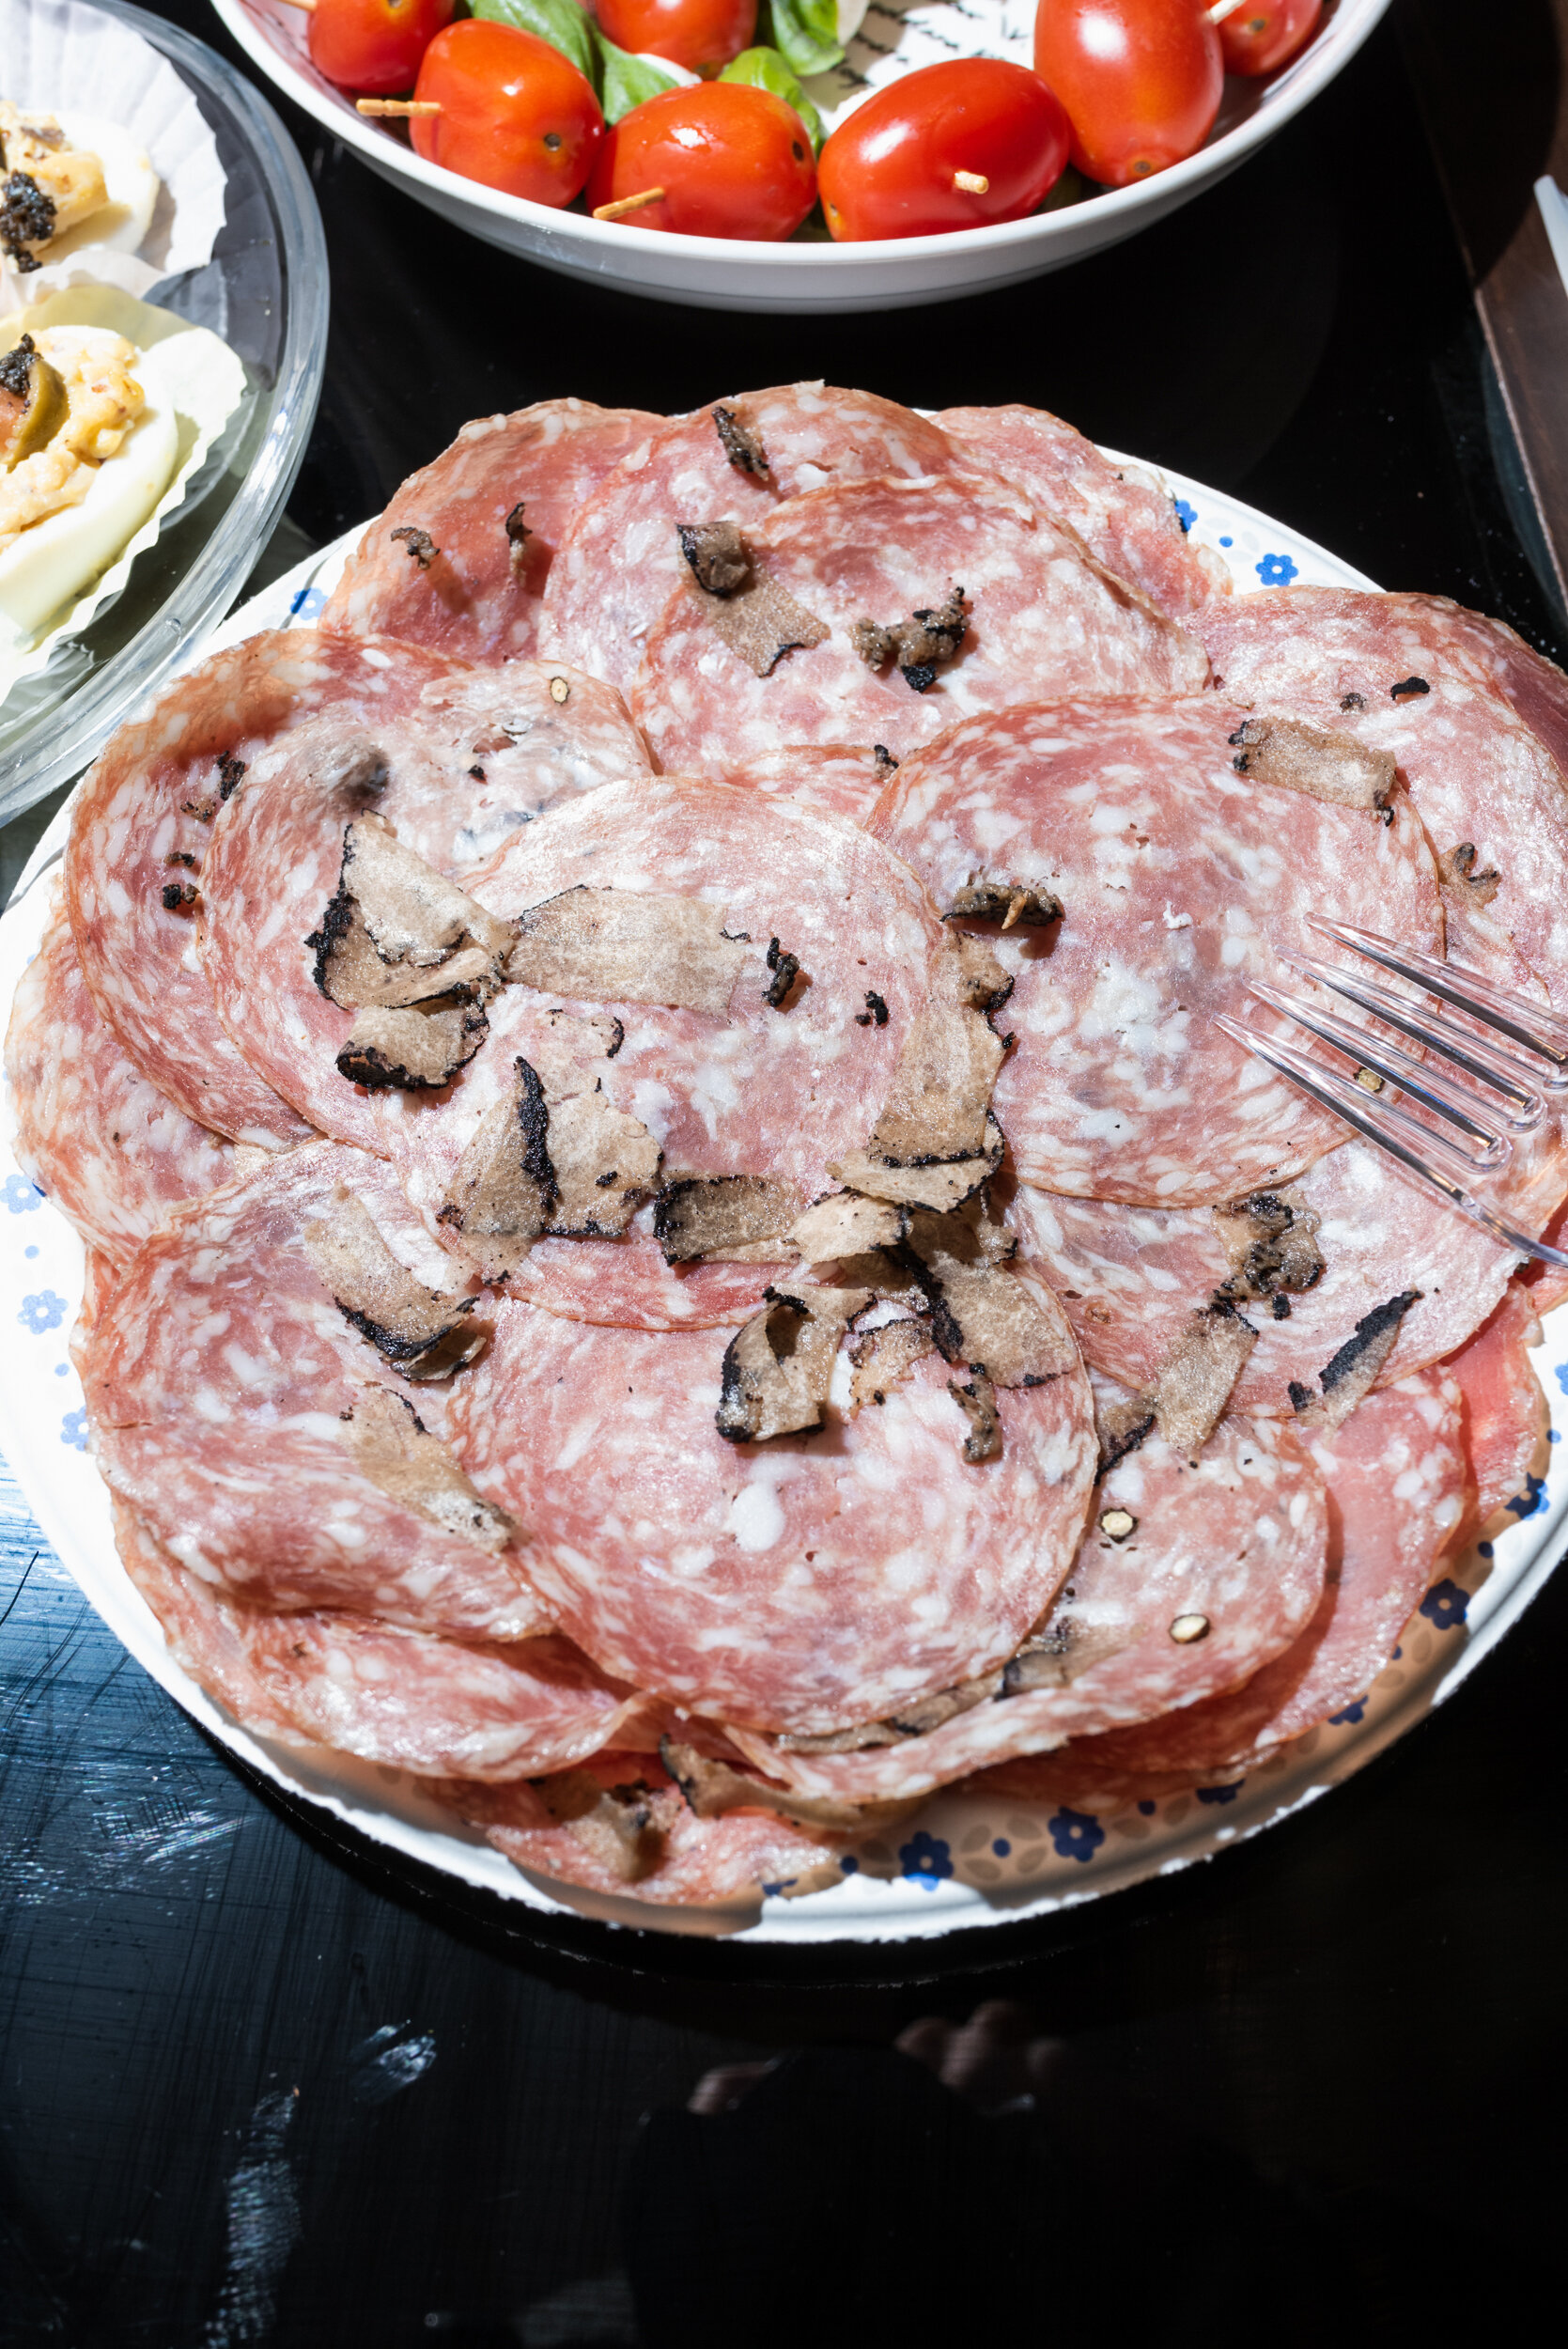 Salami with shaved truffles